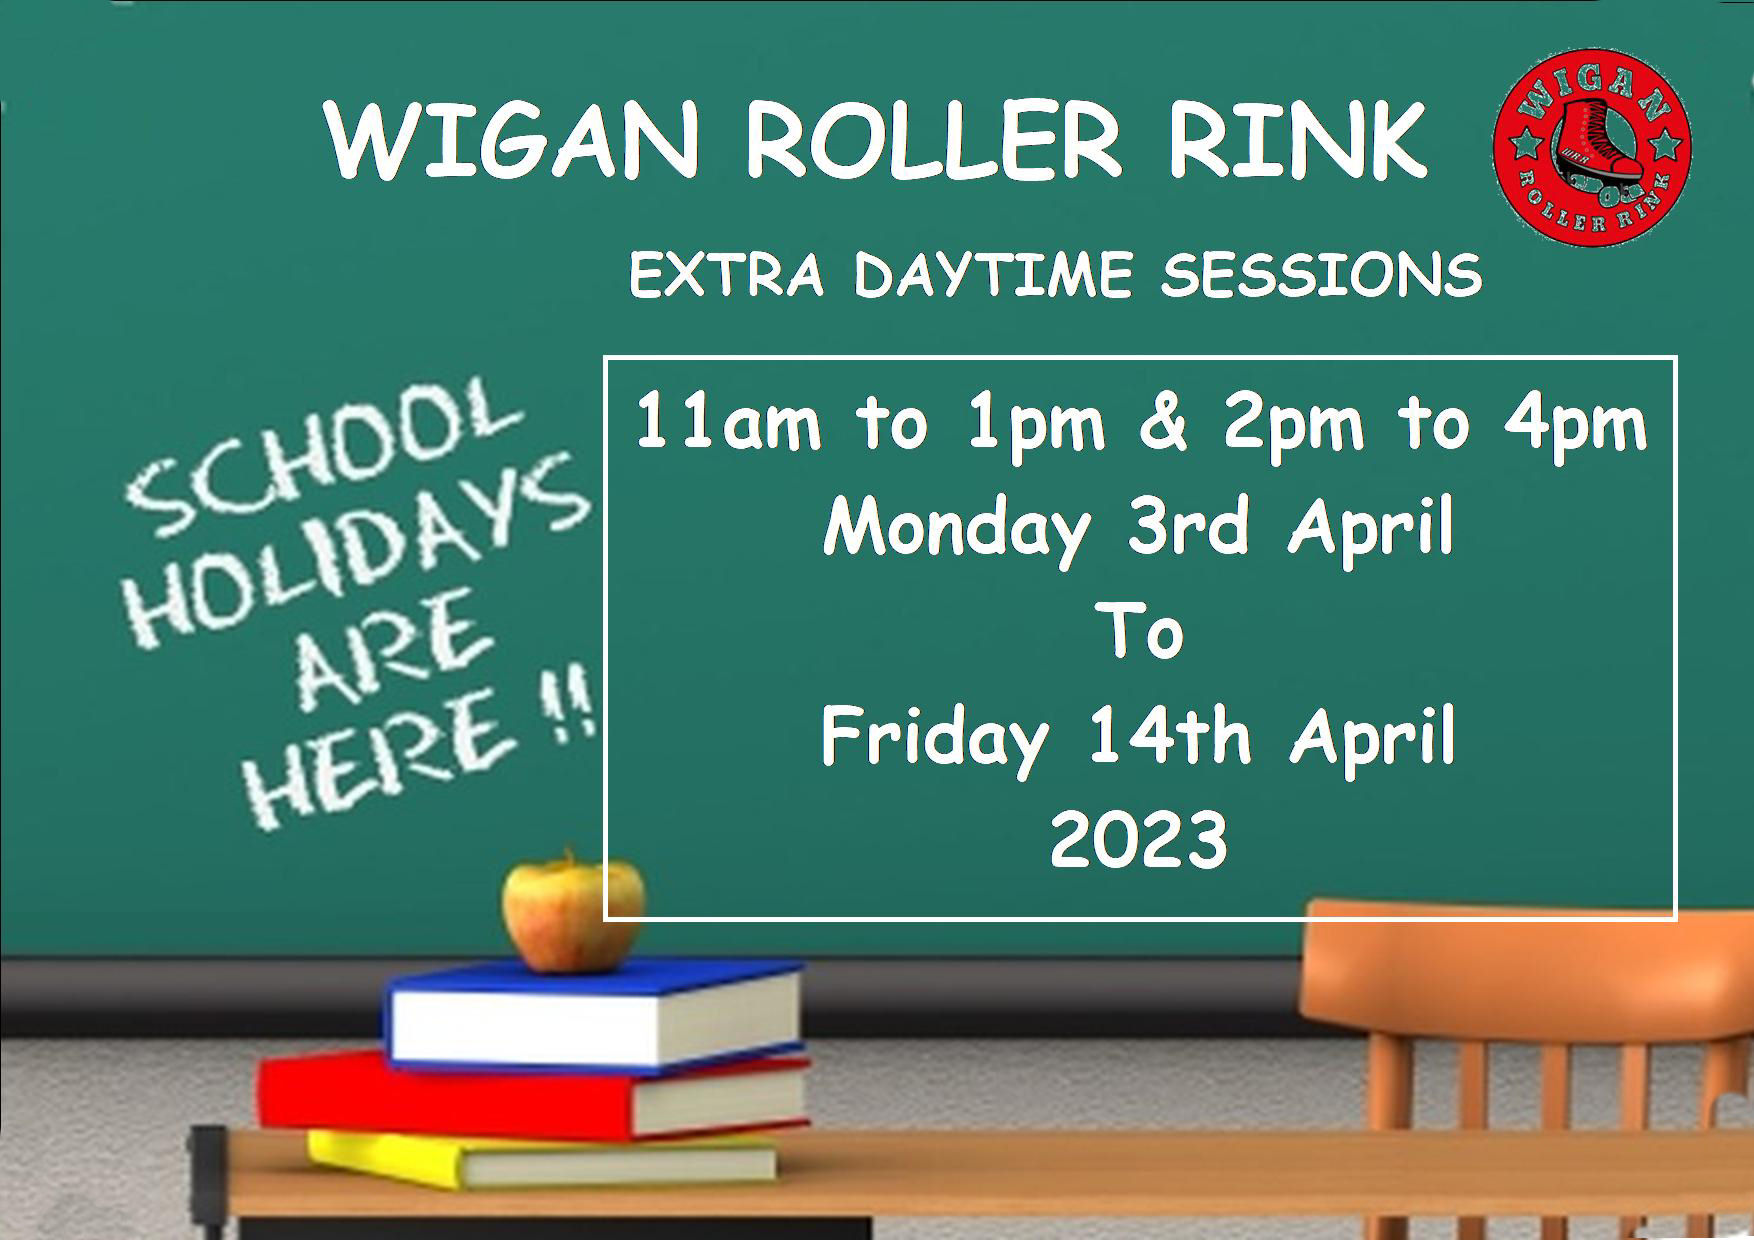 EASTER HOLIDAYS - EXTRA DAYTIME SESSIONS